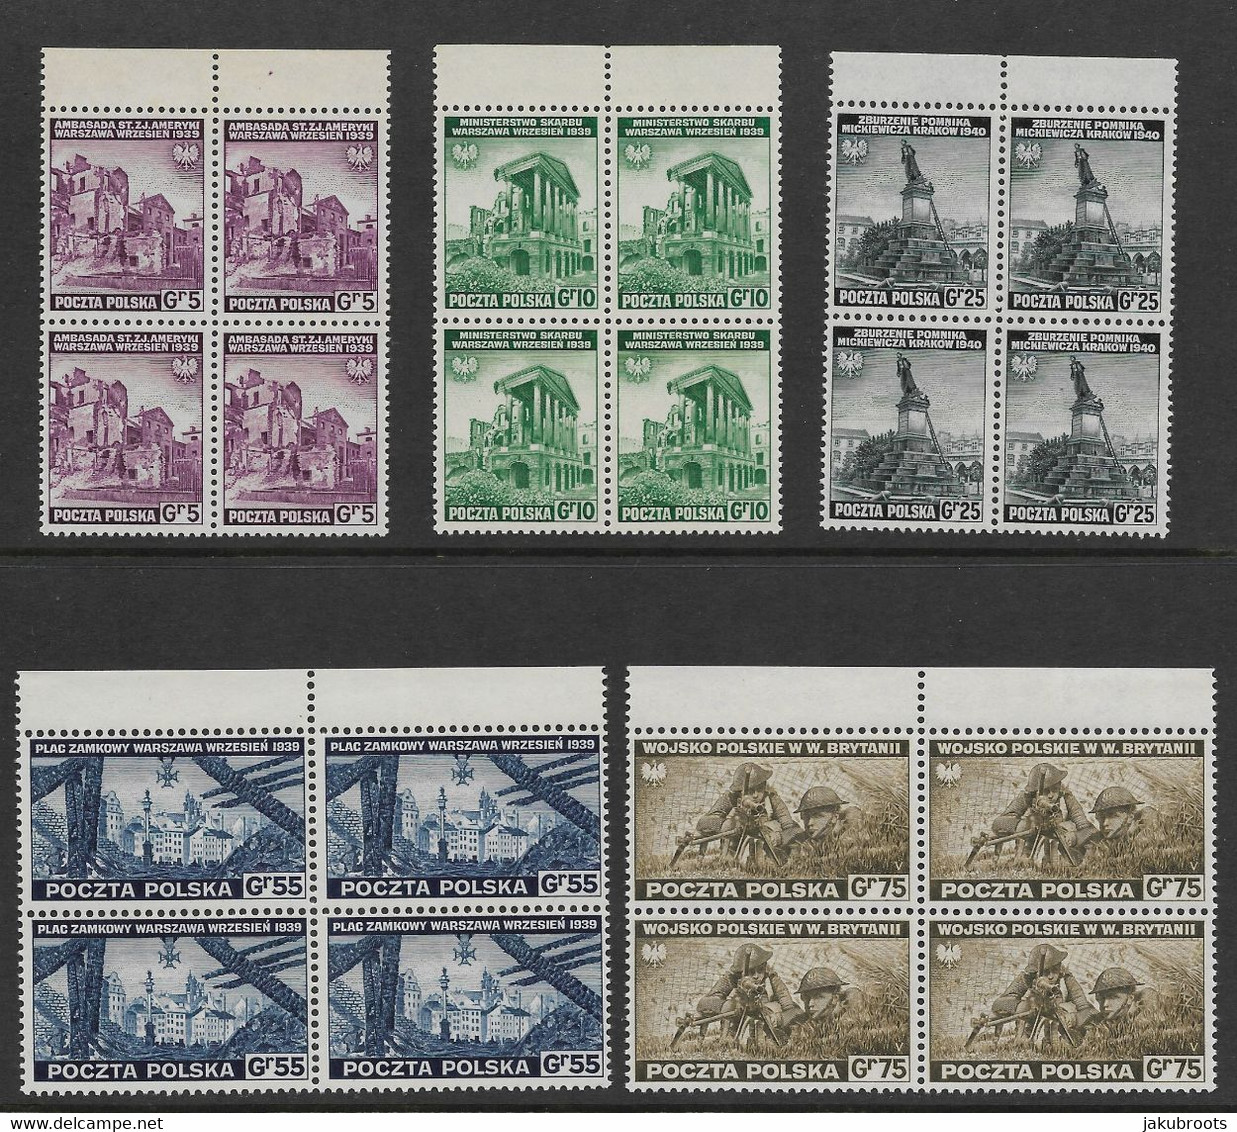 POLISH  FORCES IN  GREAT BRITAIN  DURING  THE  SECOND WORLD WAR. IN BLOCK  OF  FOUR  STAMPS .MINT - Londoner Regierung (Exil)